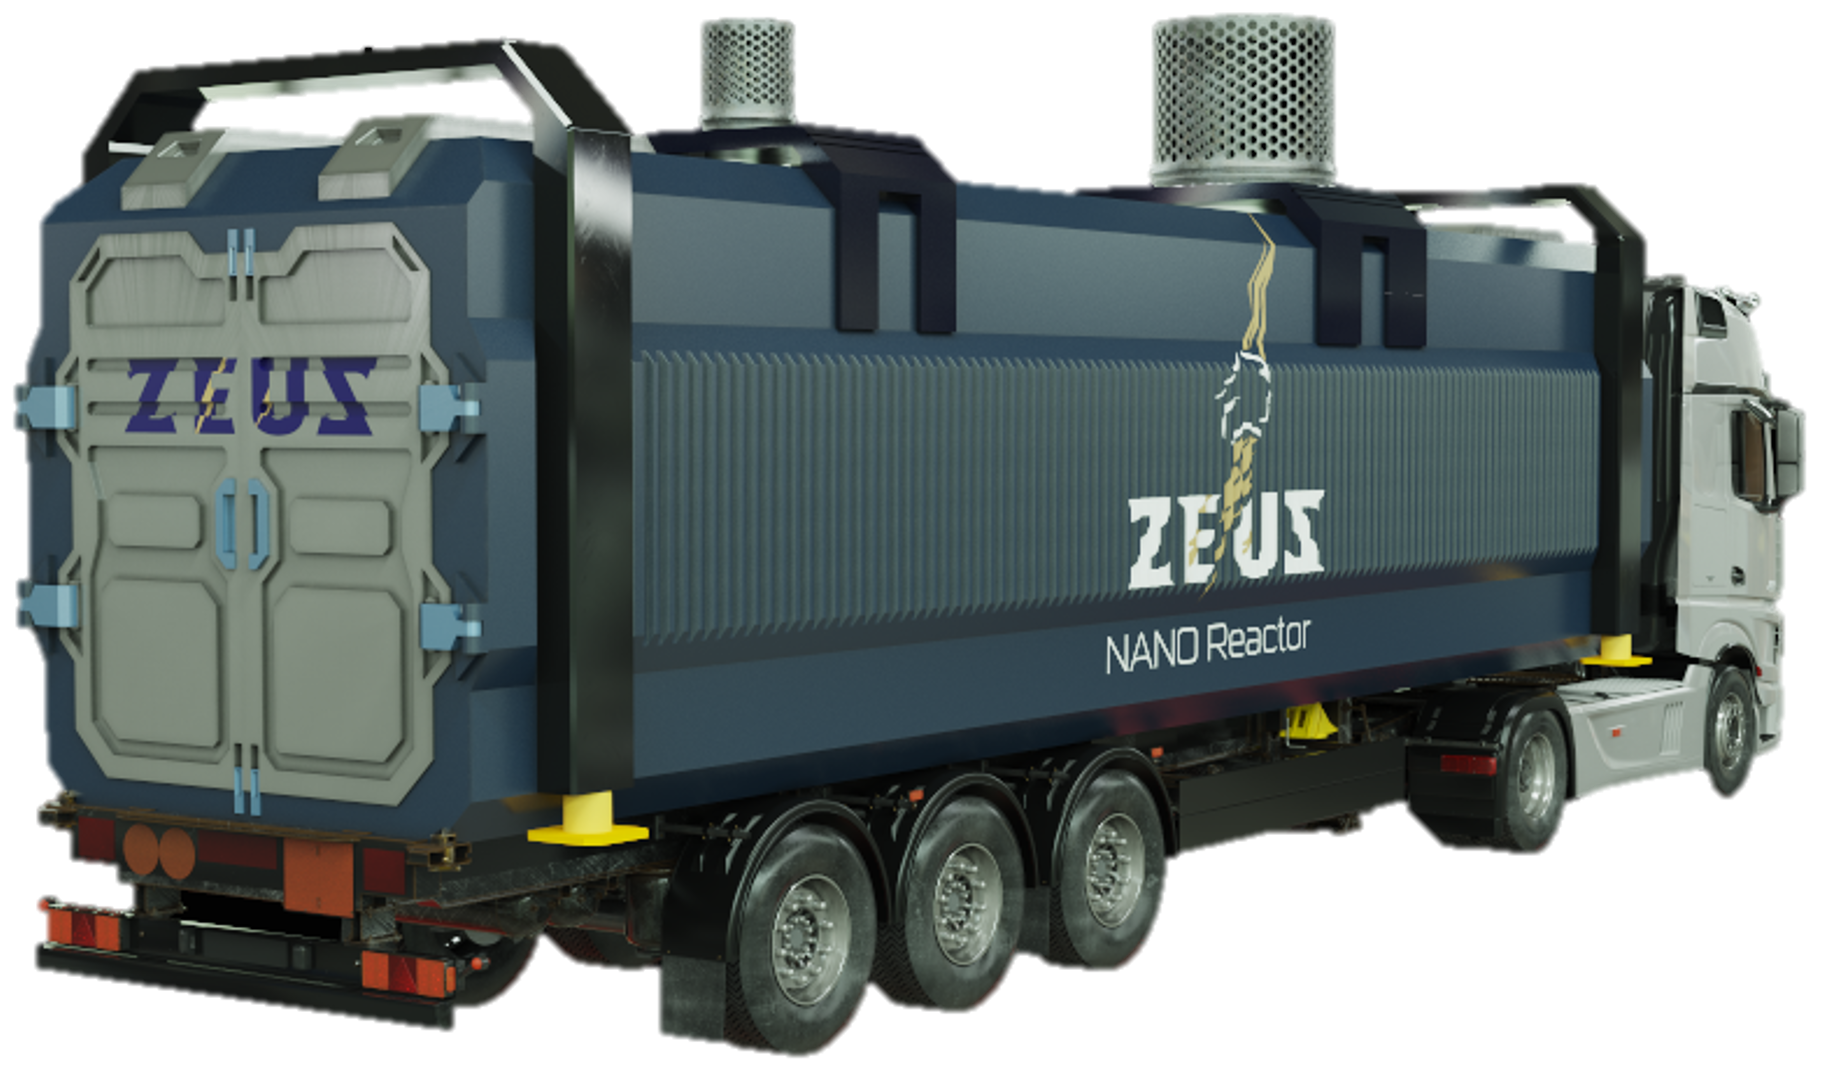 New nuclear reactor Zeus from Nano NUclear Energy